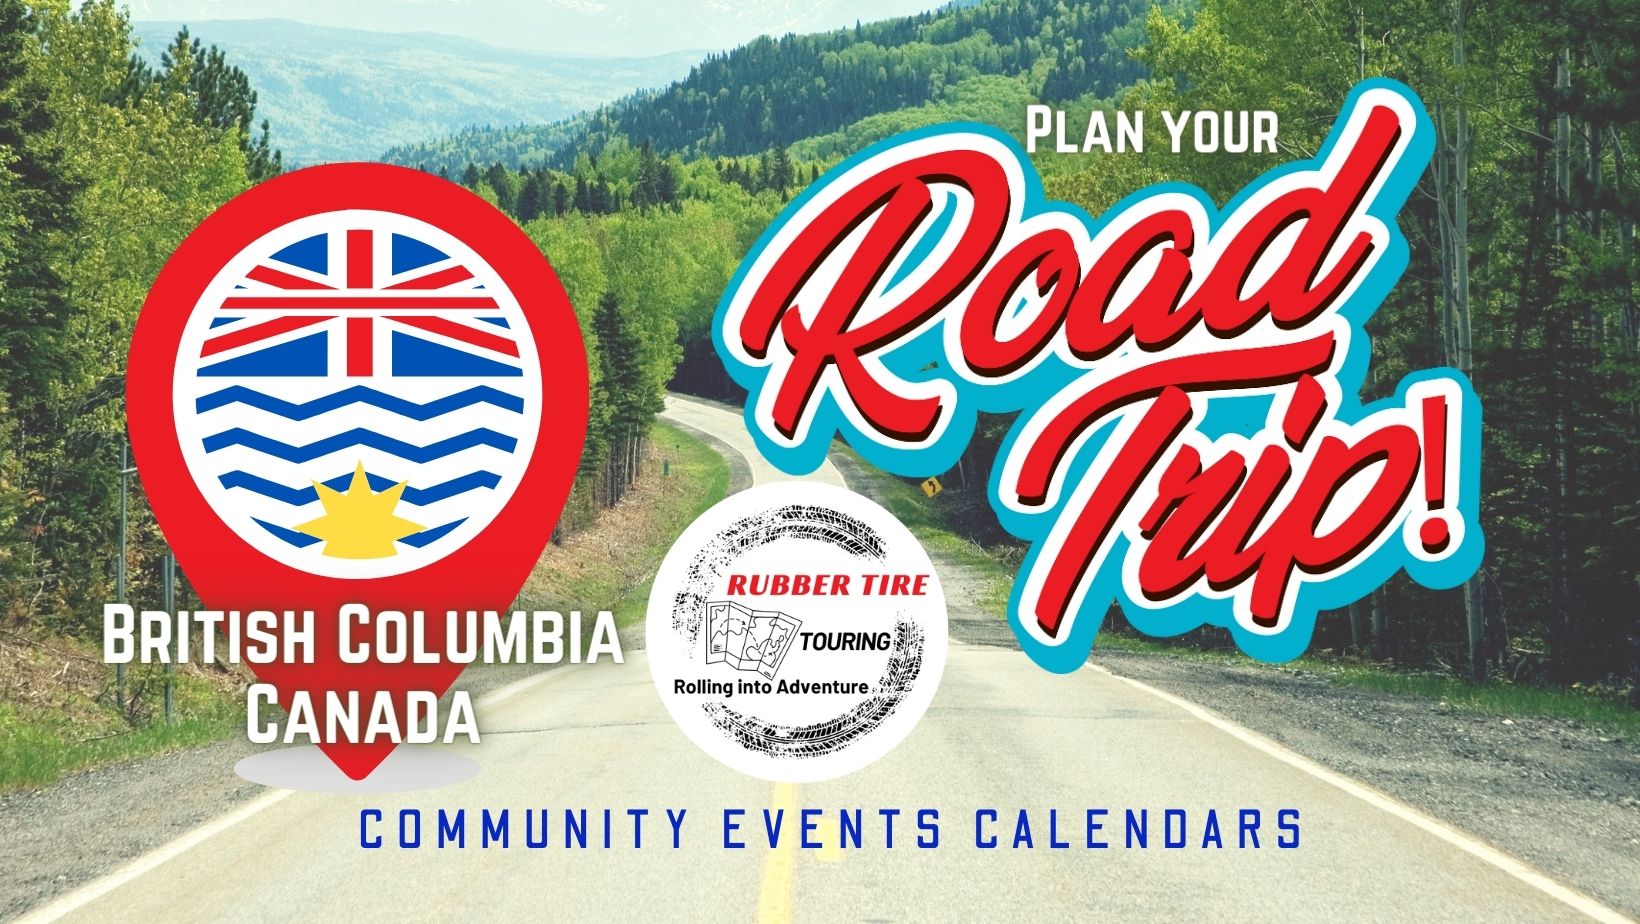 Plan BC Road Trip with our Events Calendar